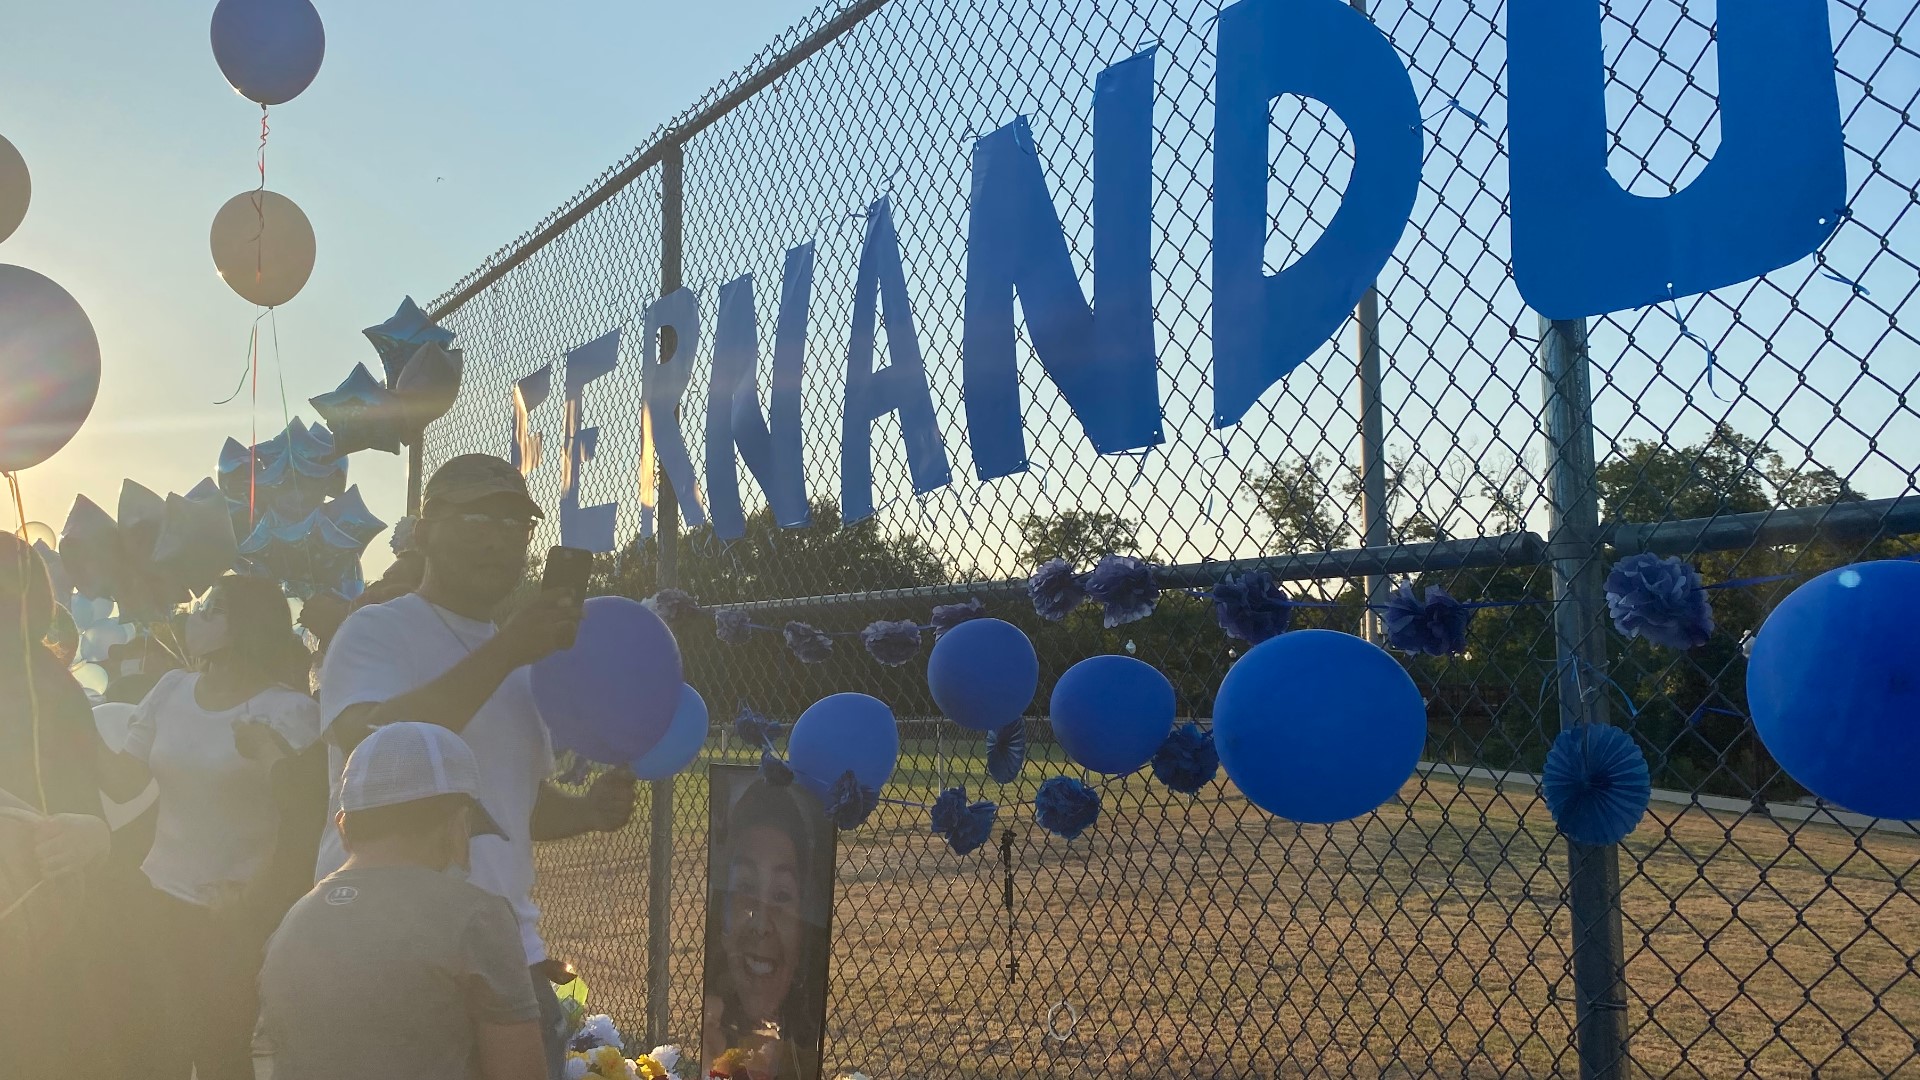 Hundreds of family members and friends of Martinez gathered to pray and release balloons in his honor.